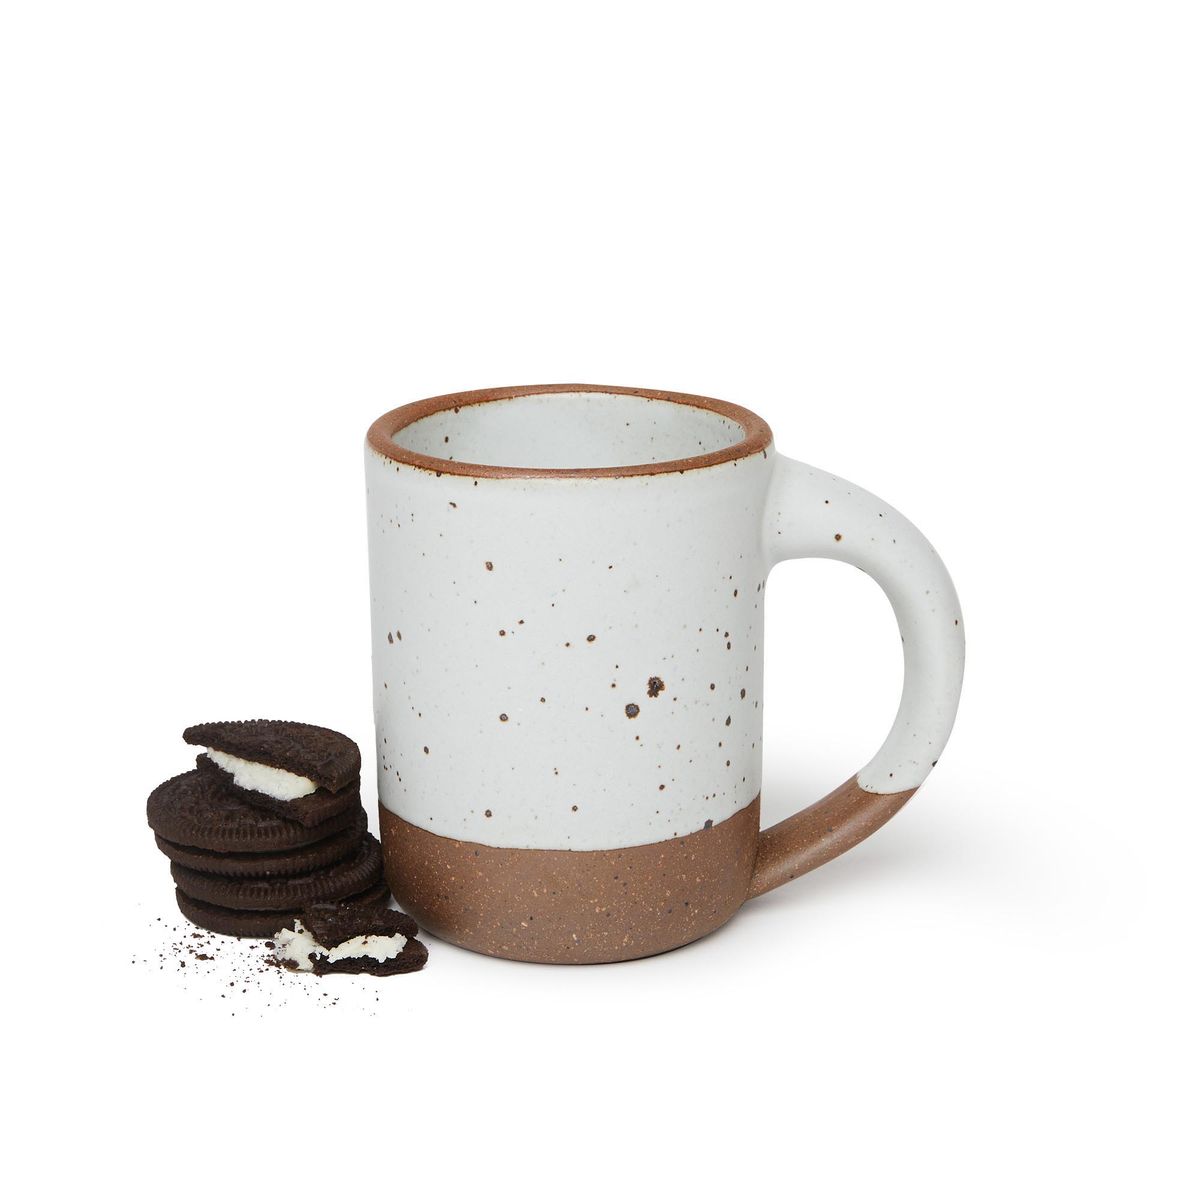 A stack of cookies next to a medium sized ceramic mug with handle in a cool white color featuring iron speckles and unglazed rim and bottom base.